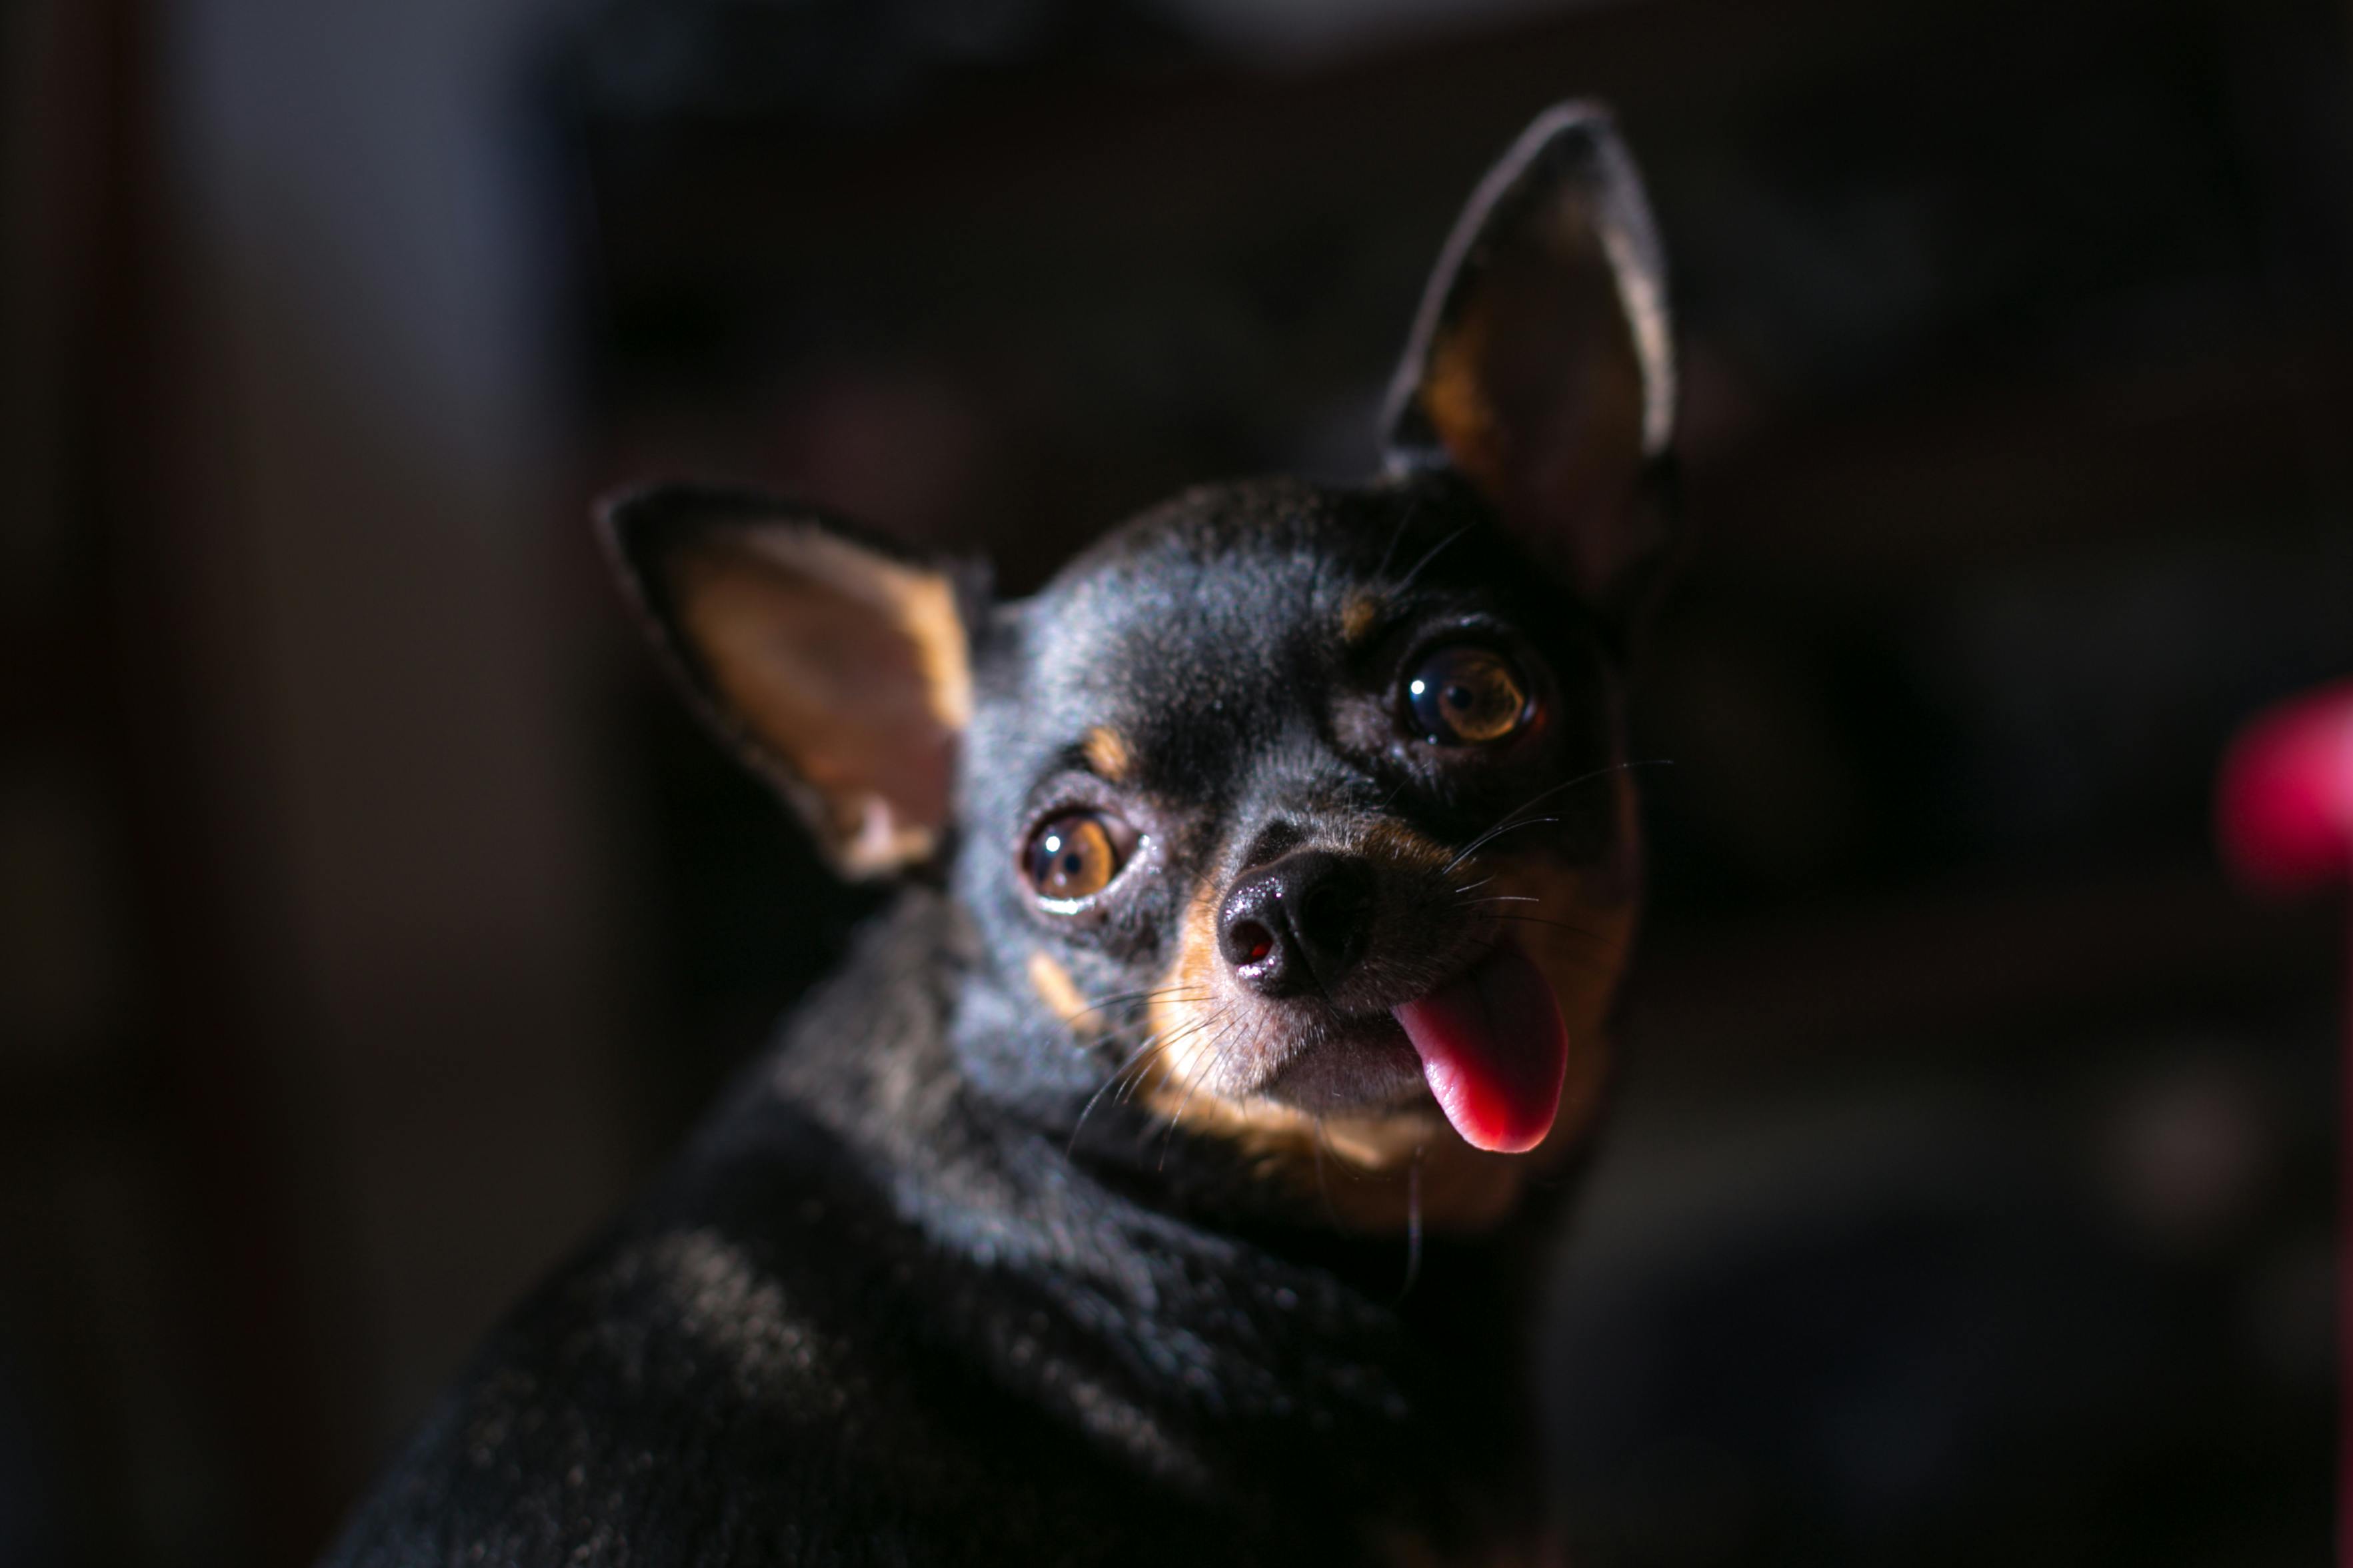 Adult Black Chihuahua Dog In Closeup Photography · Free Stock Photo